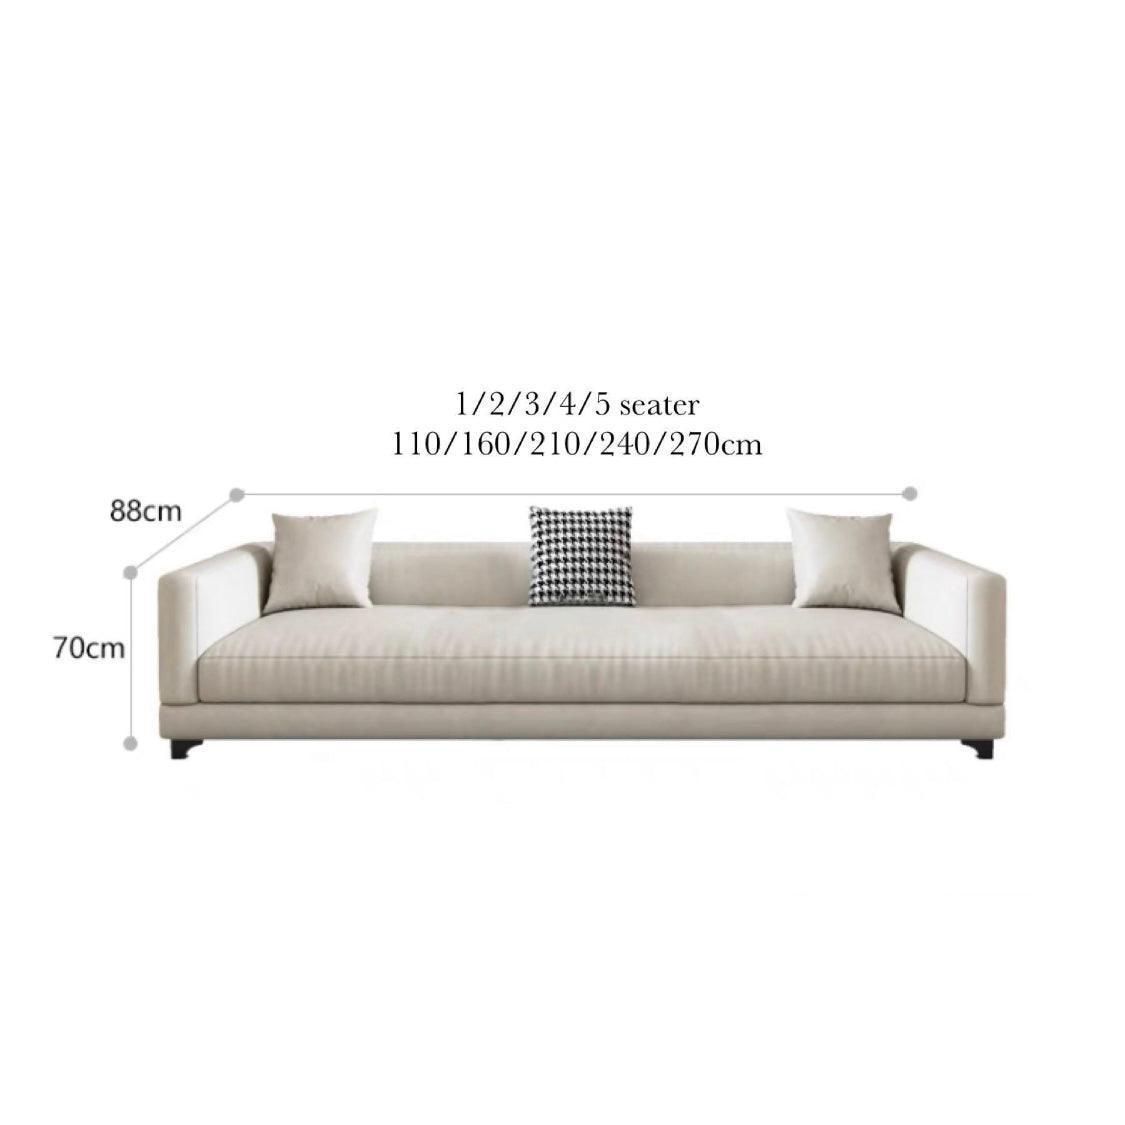 Home Atelier Cotton Linen Fabric / Length 250cm/ With Curve Chaise / Cream Alessio Designer Round Chaise Sectional Sofa